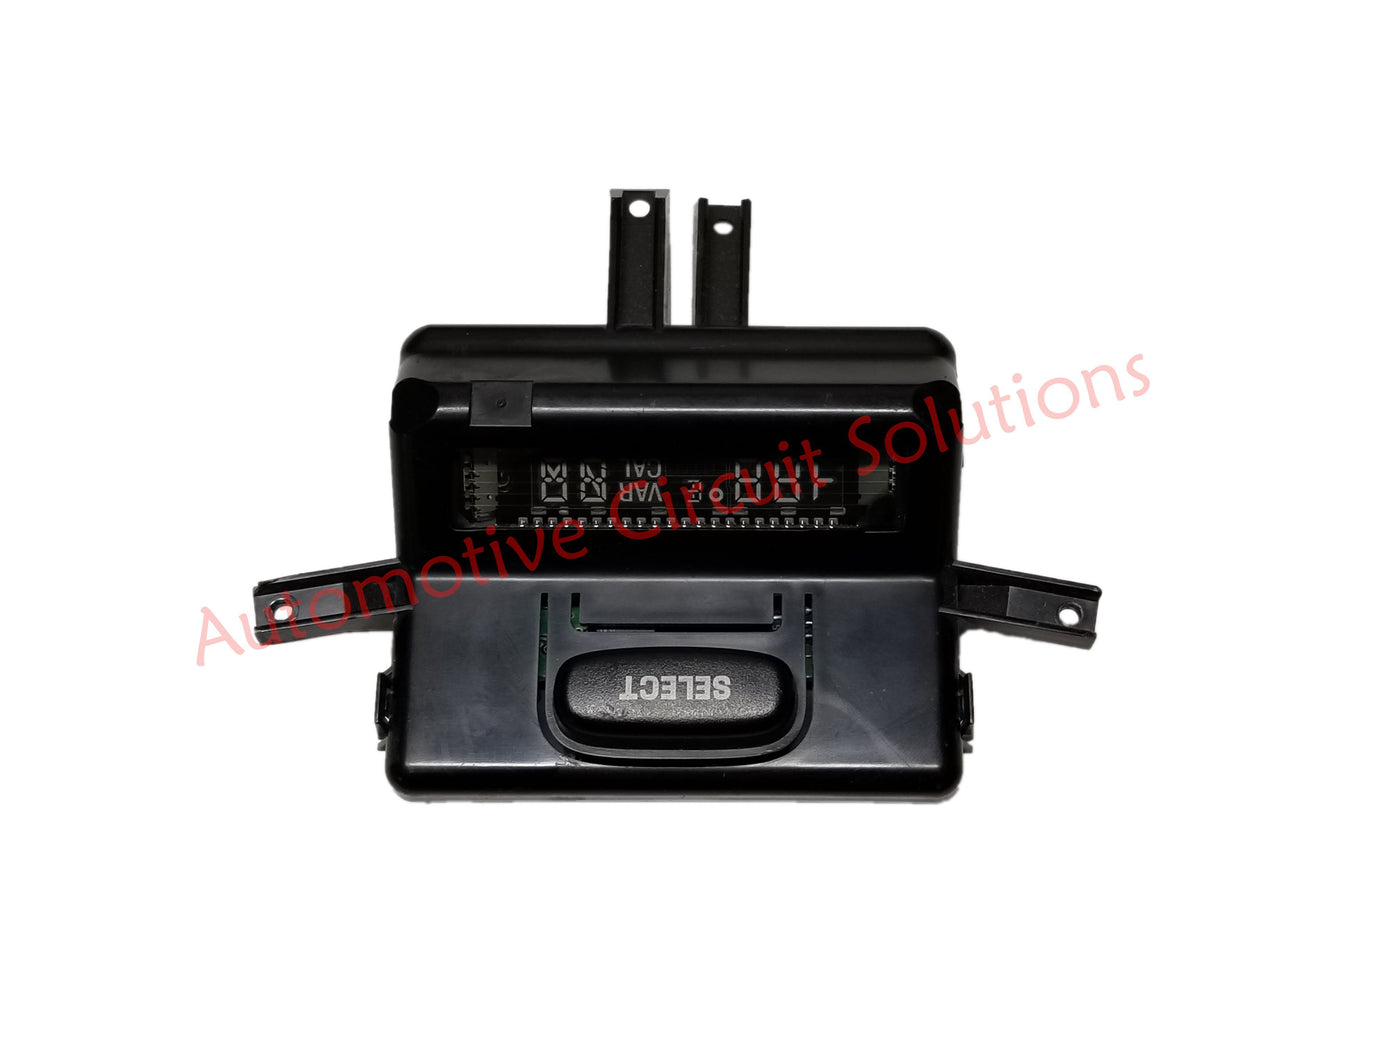 Ford Compass Temperature Overhead Console Display REPAIR SERVICE Overhead Display Repair Automotive Circuit Solutions 